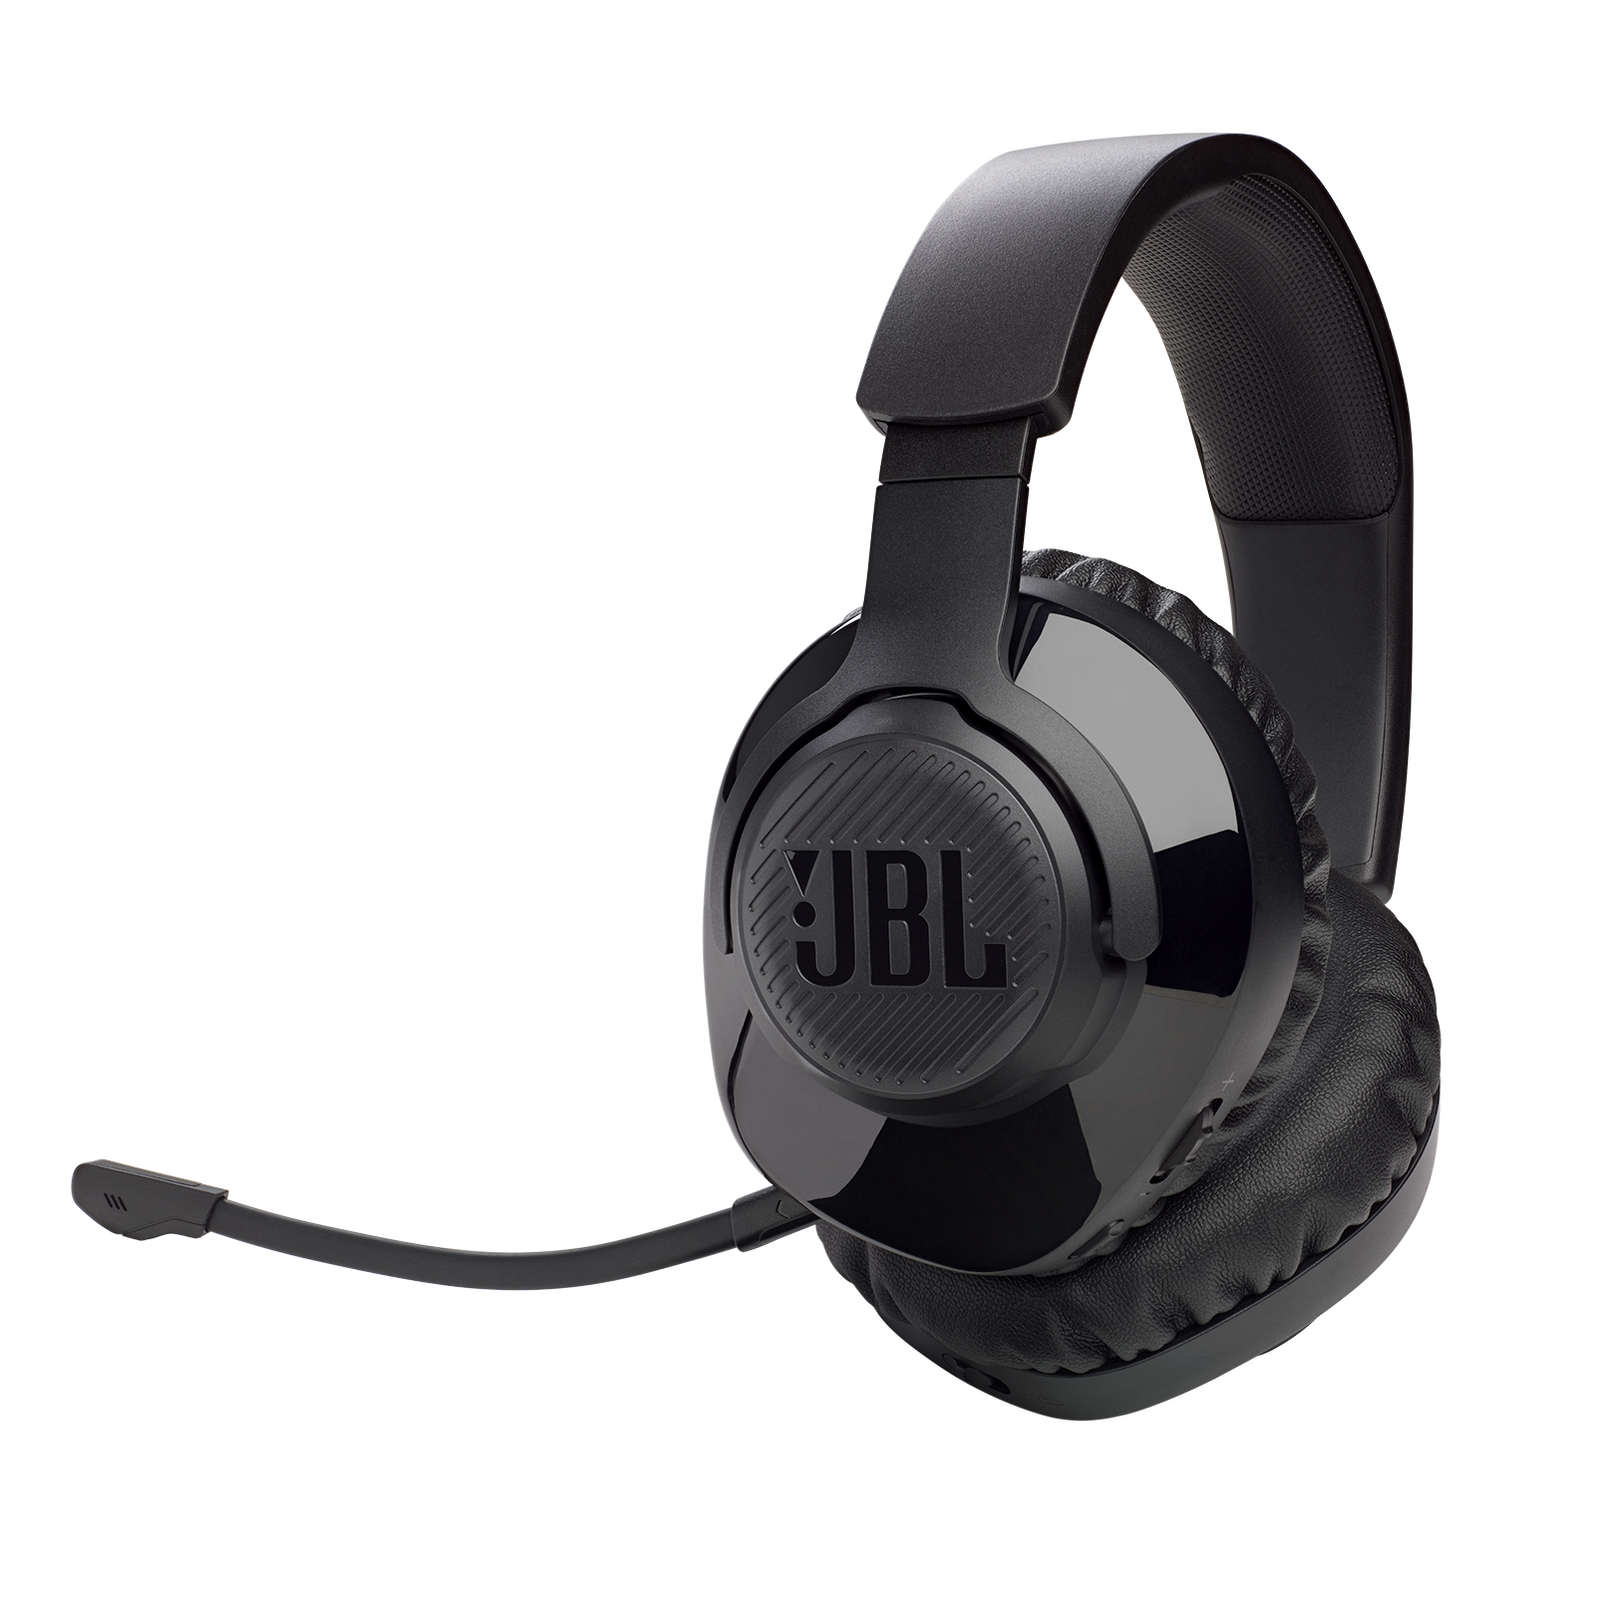 JBL Quantum 350 Black | Over-Ear Wireless Gaming Headset - QuantumSOUND - PS5/XBOX One/Switch/PC Compatible Gaming Headset